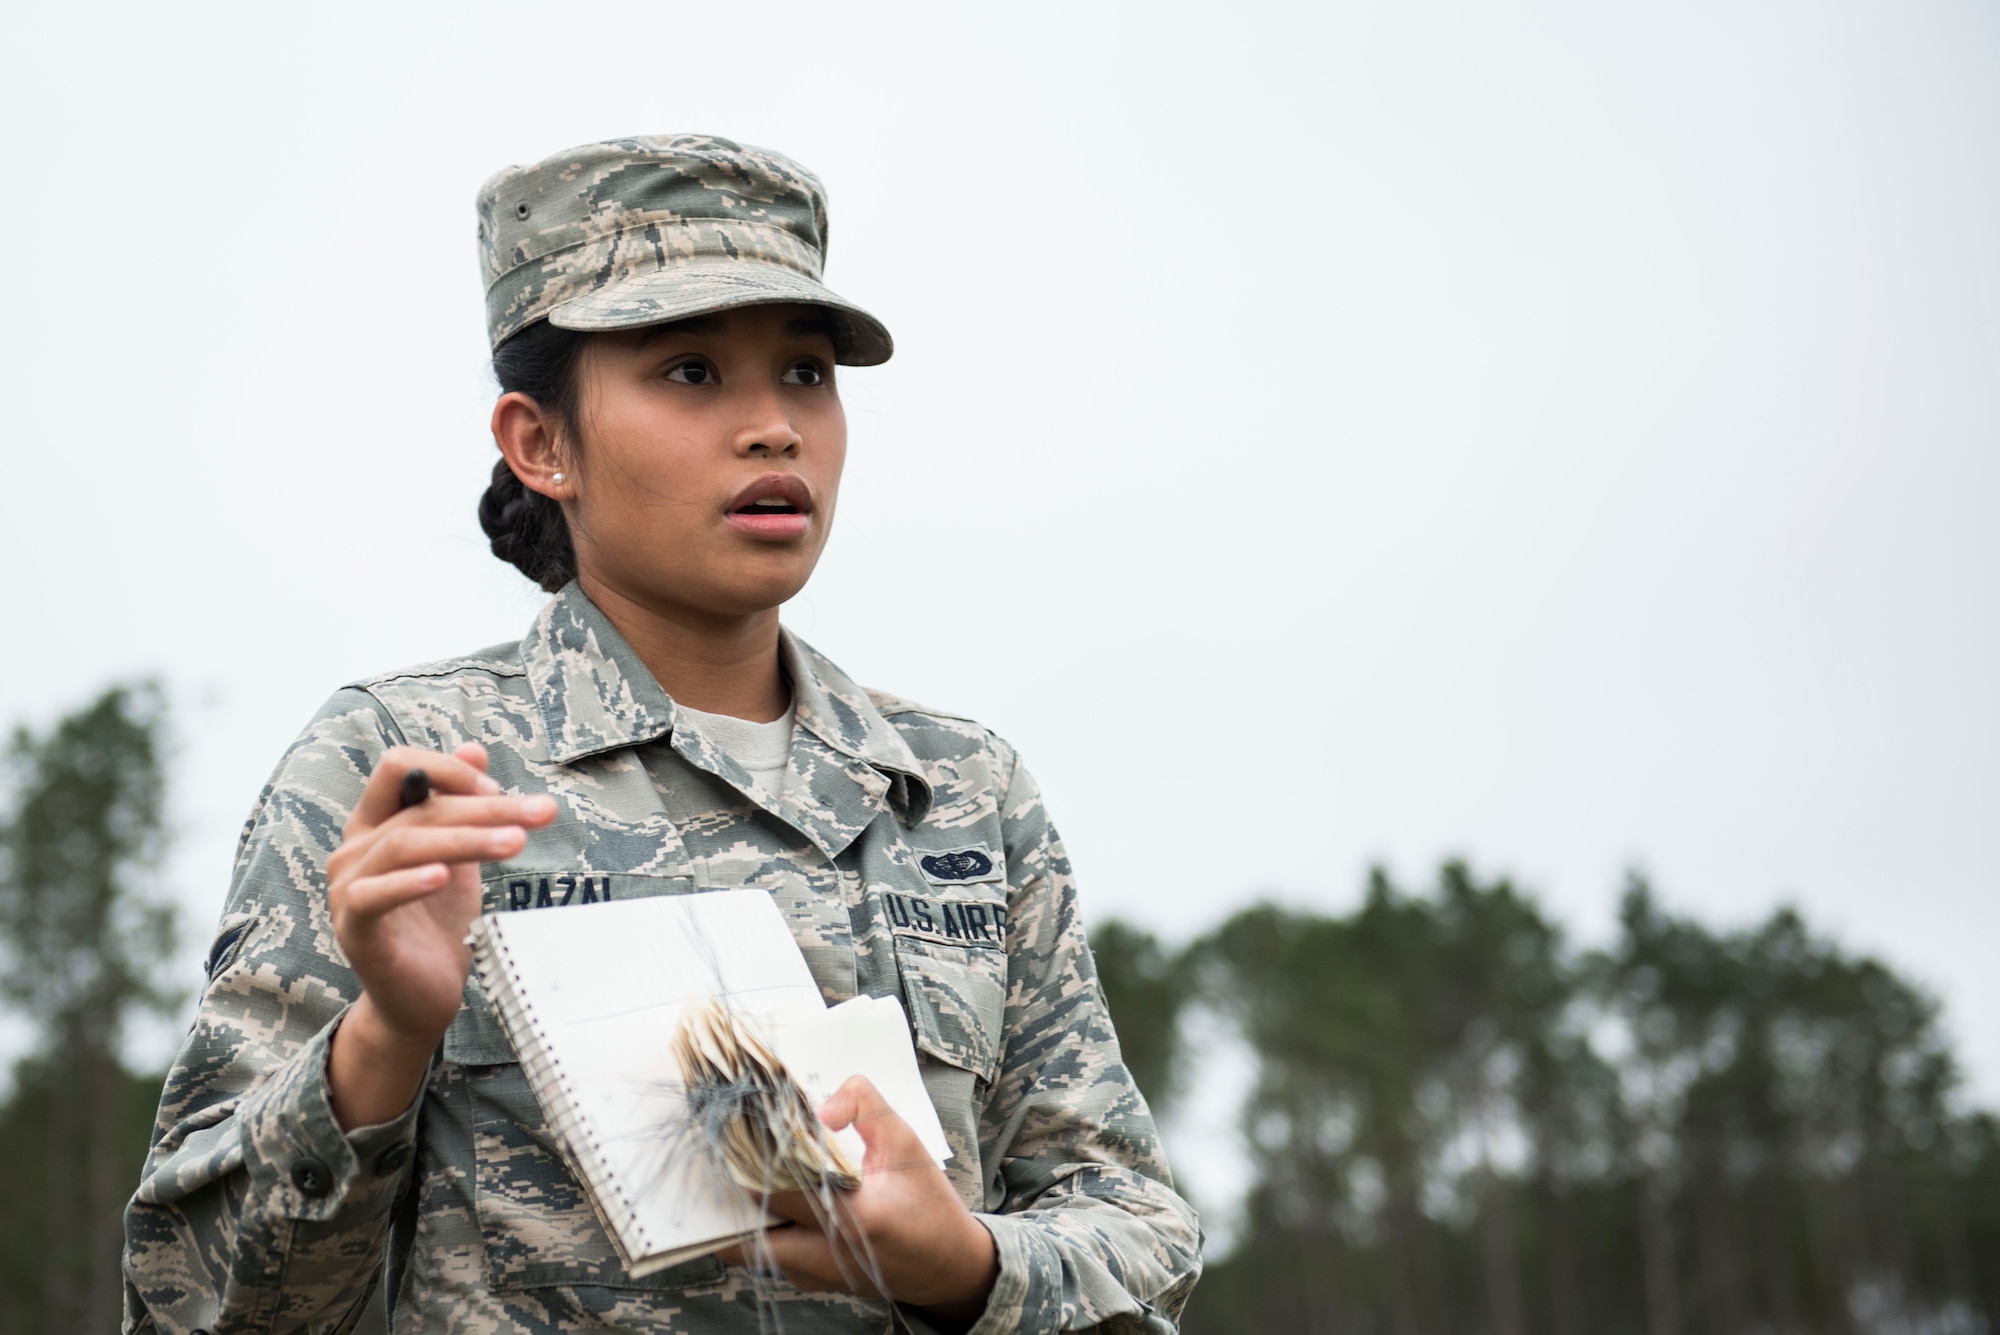 A U.S. Airman assigned to the 20th Force Support Squadron explains how search and recovery tags work prior to an exercise at Shaw Air Force Base, S.C., May 23, 2018.